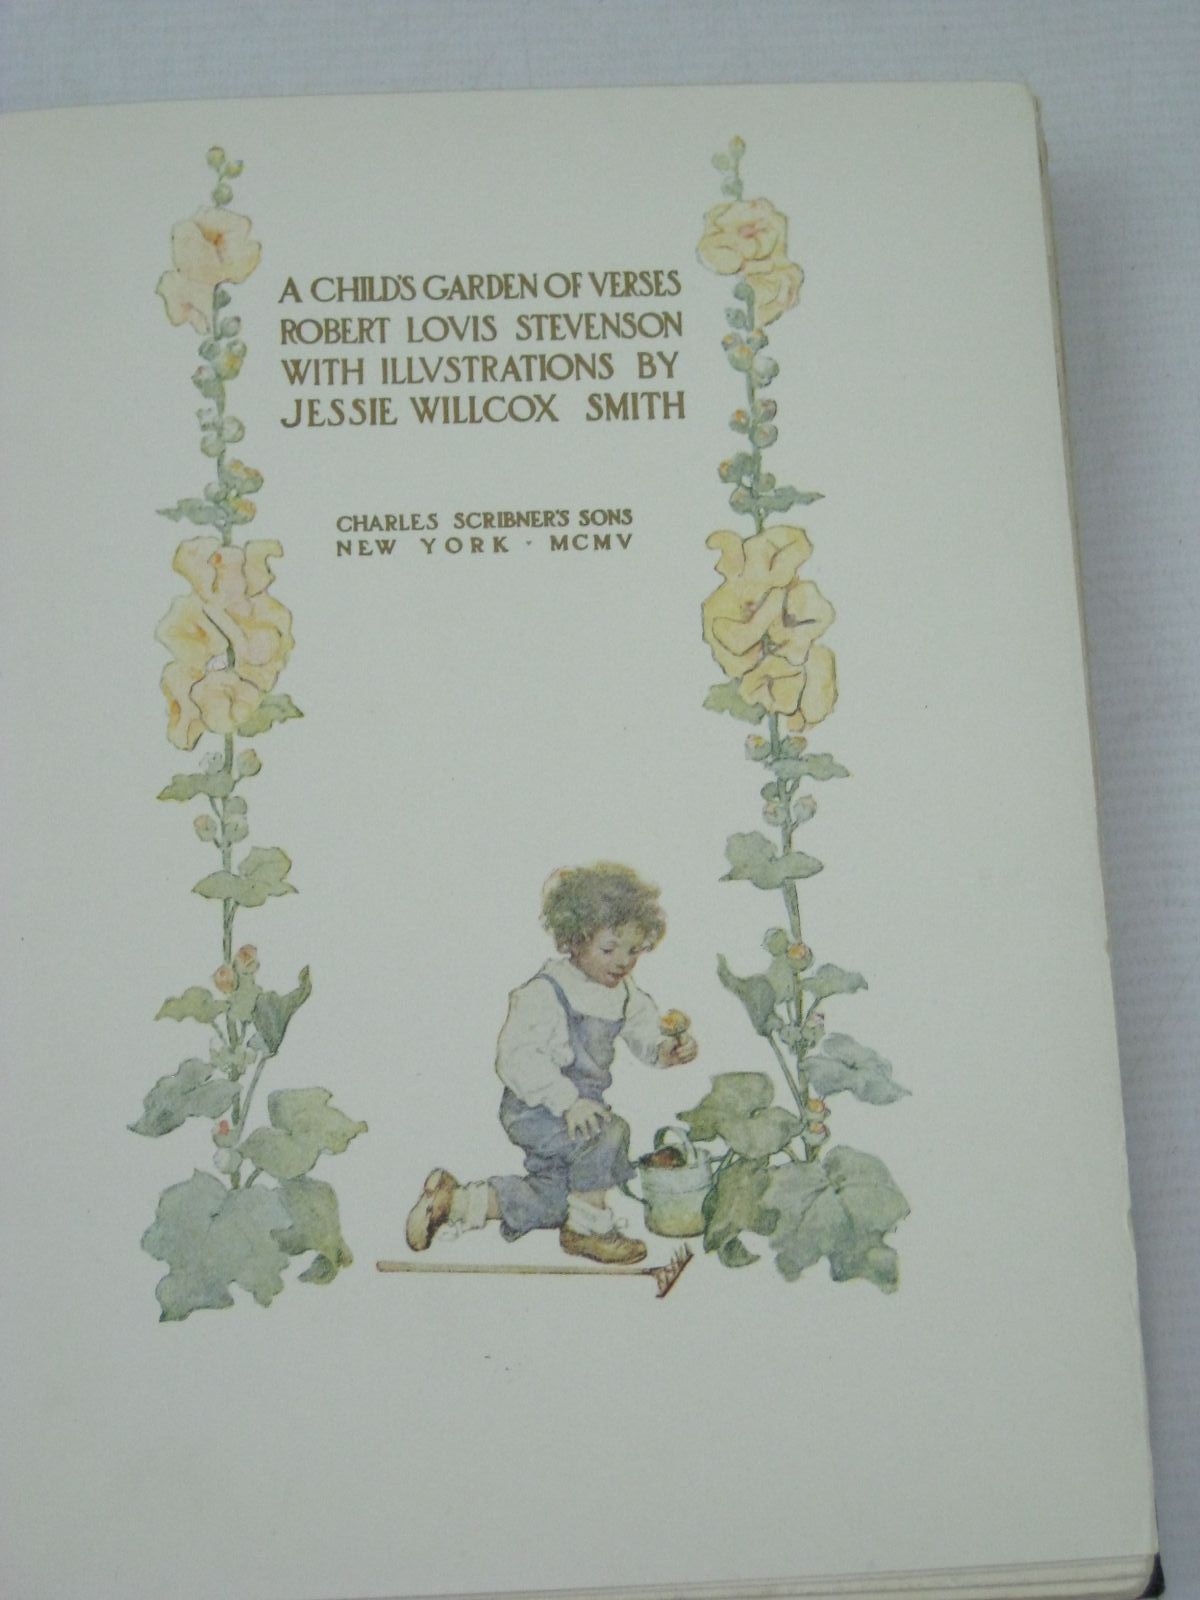 Photo of THE CHUMMY BOOK - THIRTEENTH YEAR written by Chisholm, Edwin
Russell, Dorothy
Herbertson, Agnes Grozier
Hart, Frank
Mercer, Joyce
et al, illustrated by Wood, Lawson
Preston, Chloe
Studdy, G.E.
Woolley, Harry
Hart, Frank
et al., published by Thomas Nelson and Sons Ltd. (STOCK CODE: 1505441)  for sale by Stella & Rose's Books